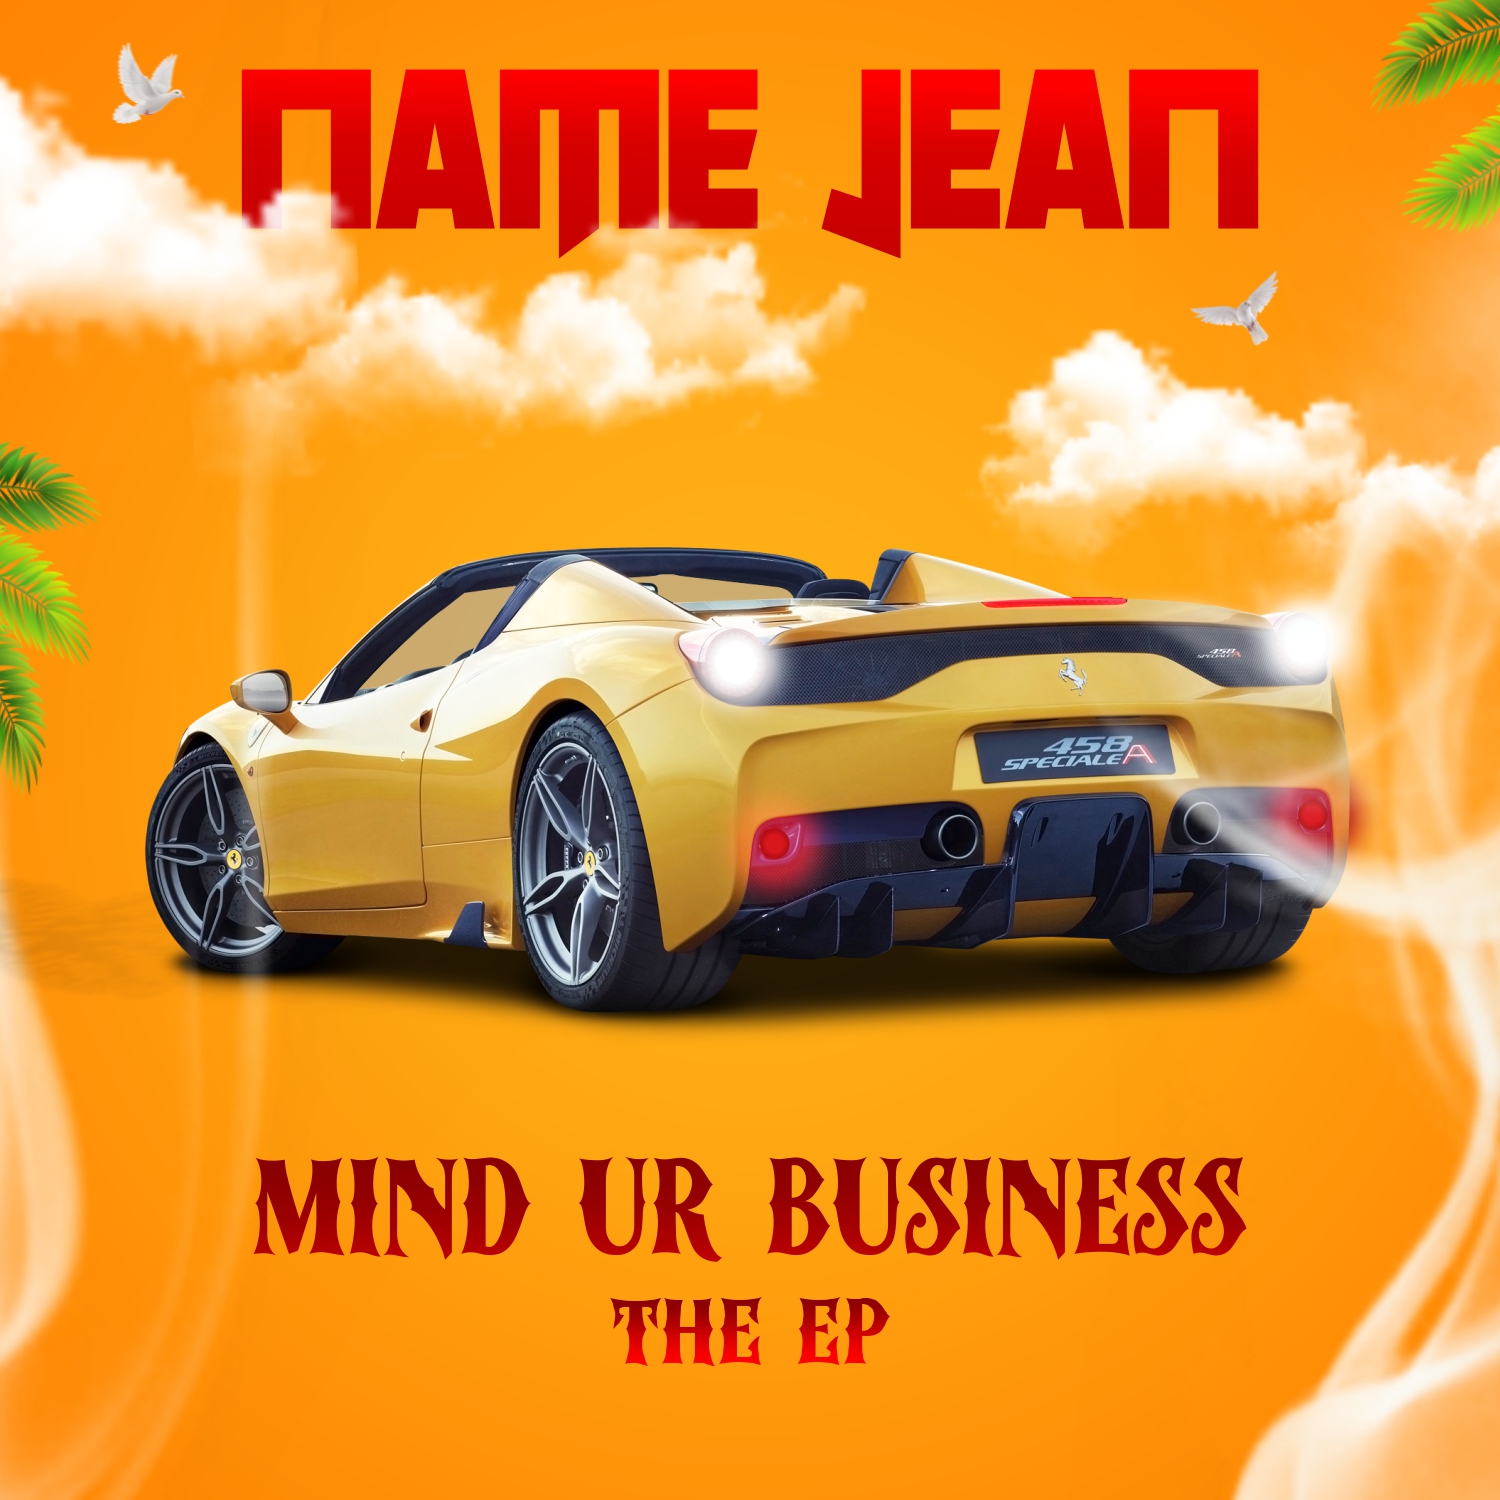 Name Jean – Business